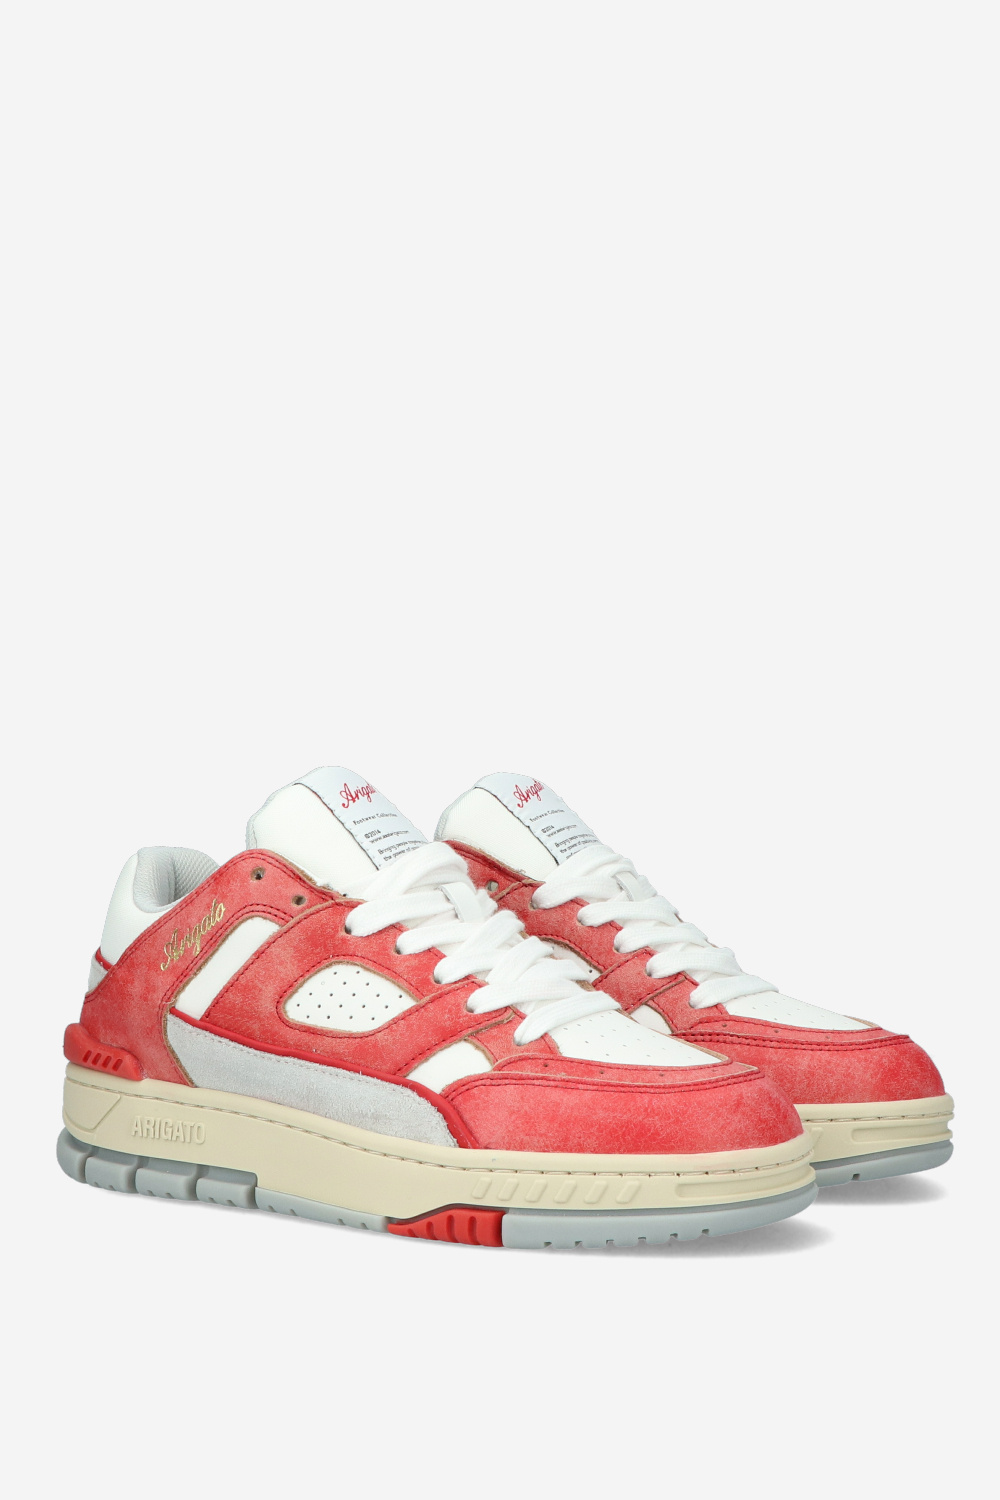 Axel Arigato Sneakers Red